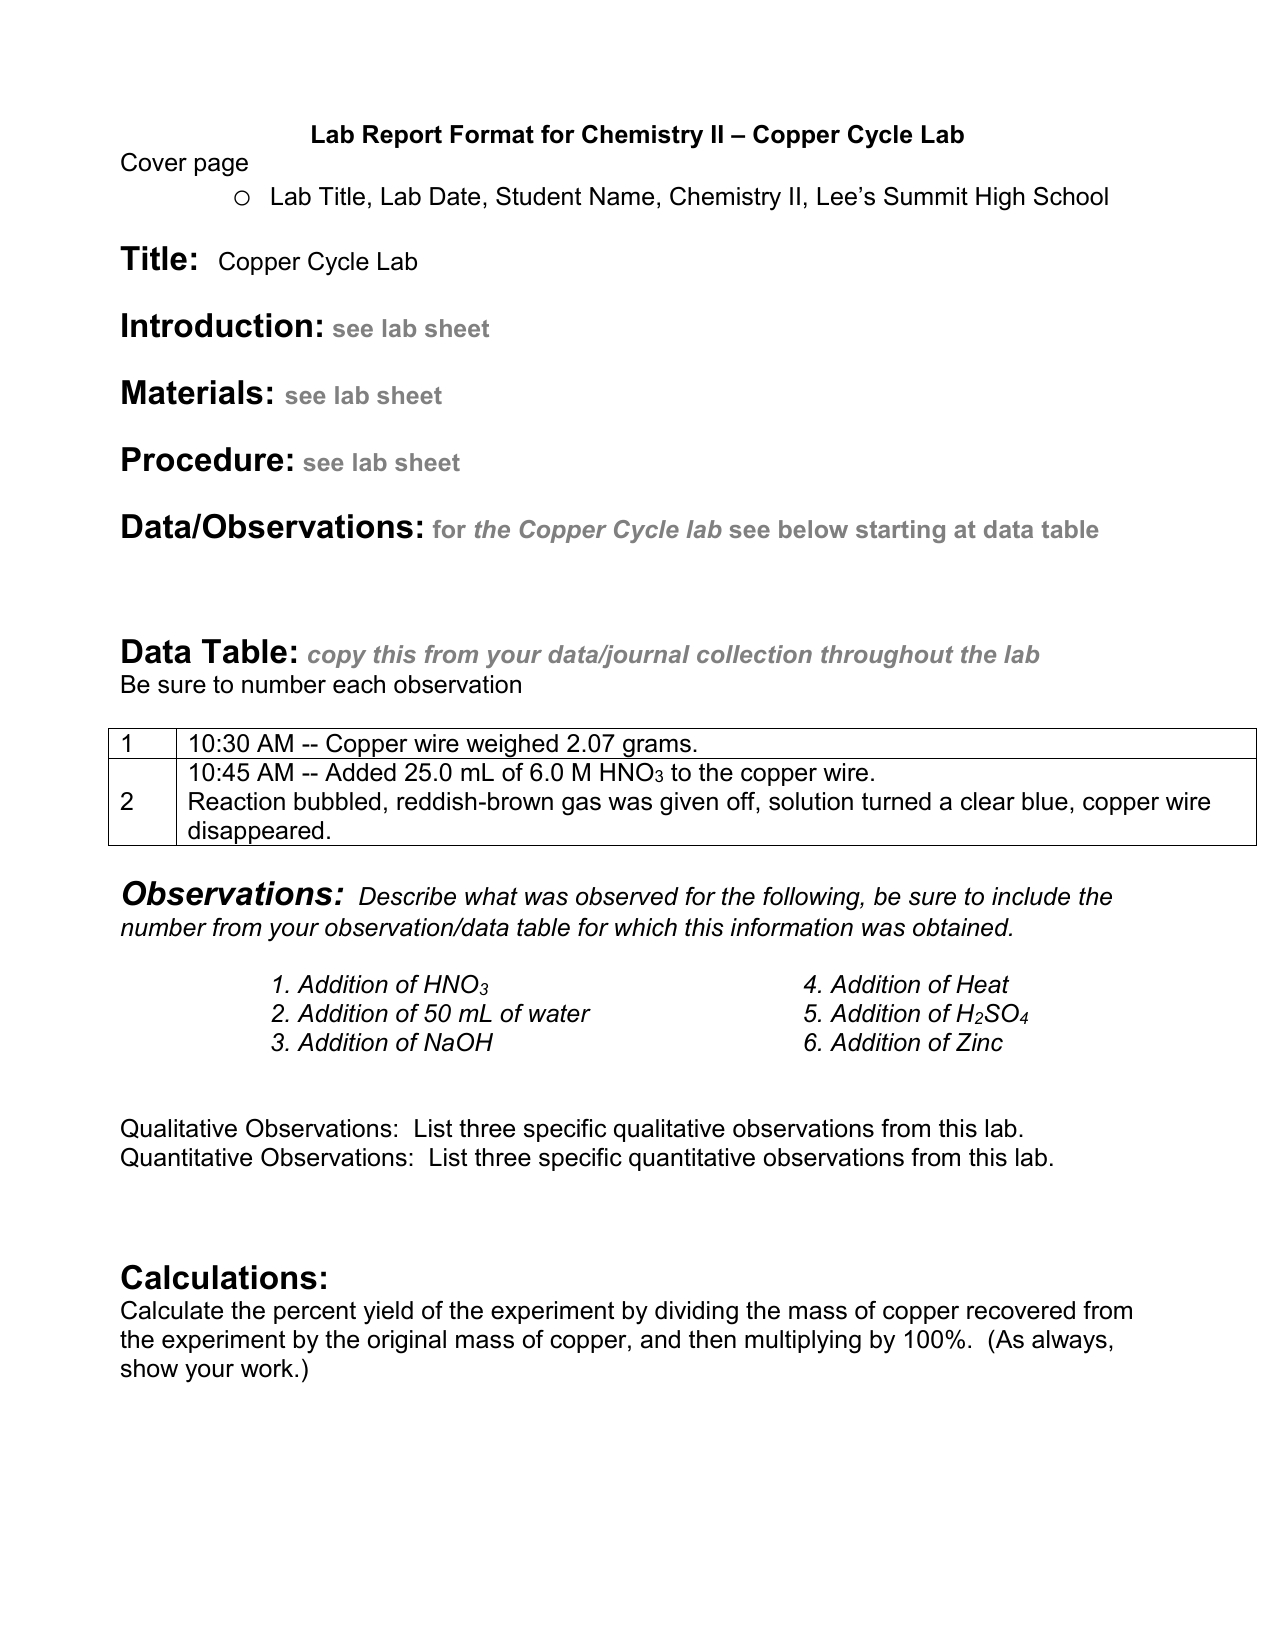 Lab Report Format For As Chemistry With Lab Report Template Chemistry